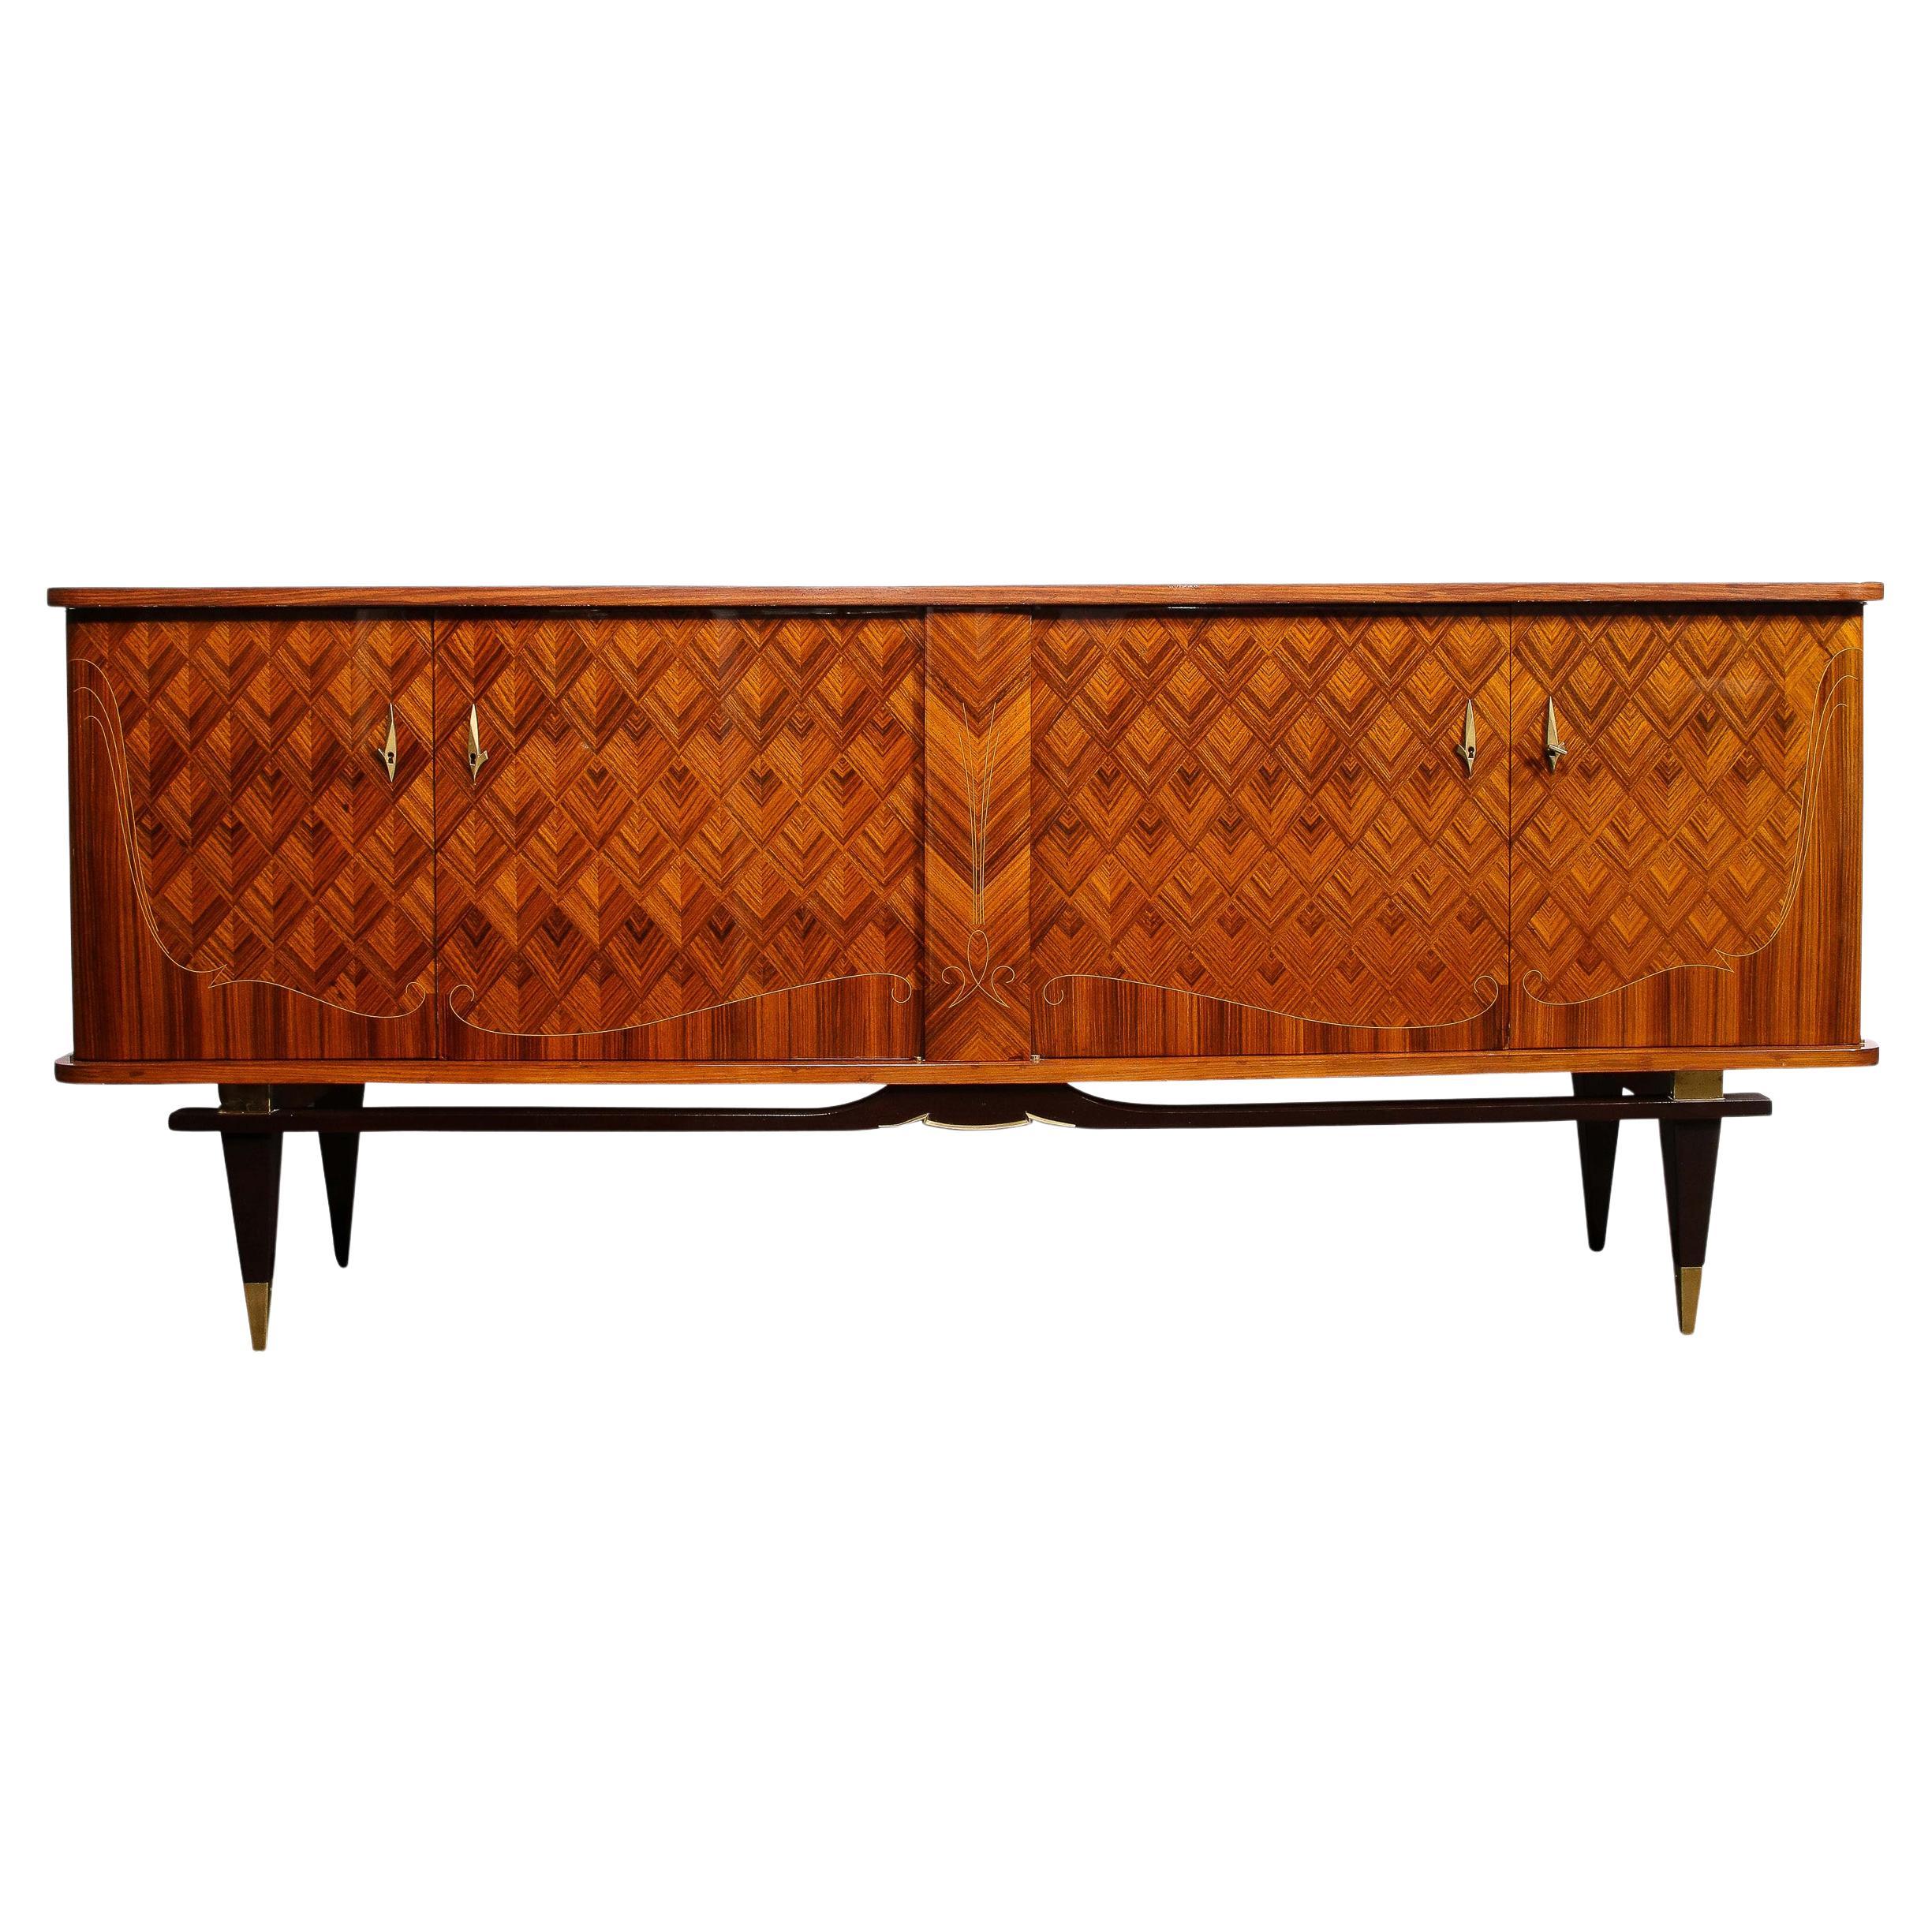 Mid-Century Sideboard in Book-Matched Walnut & Rosewood with Tulip Wood Inlays